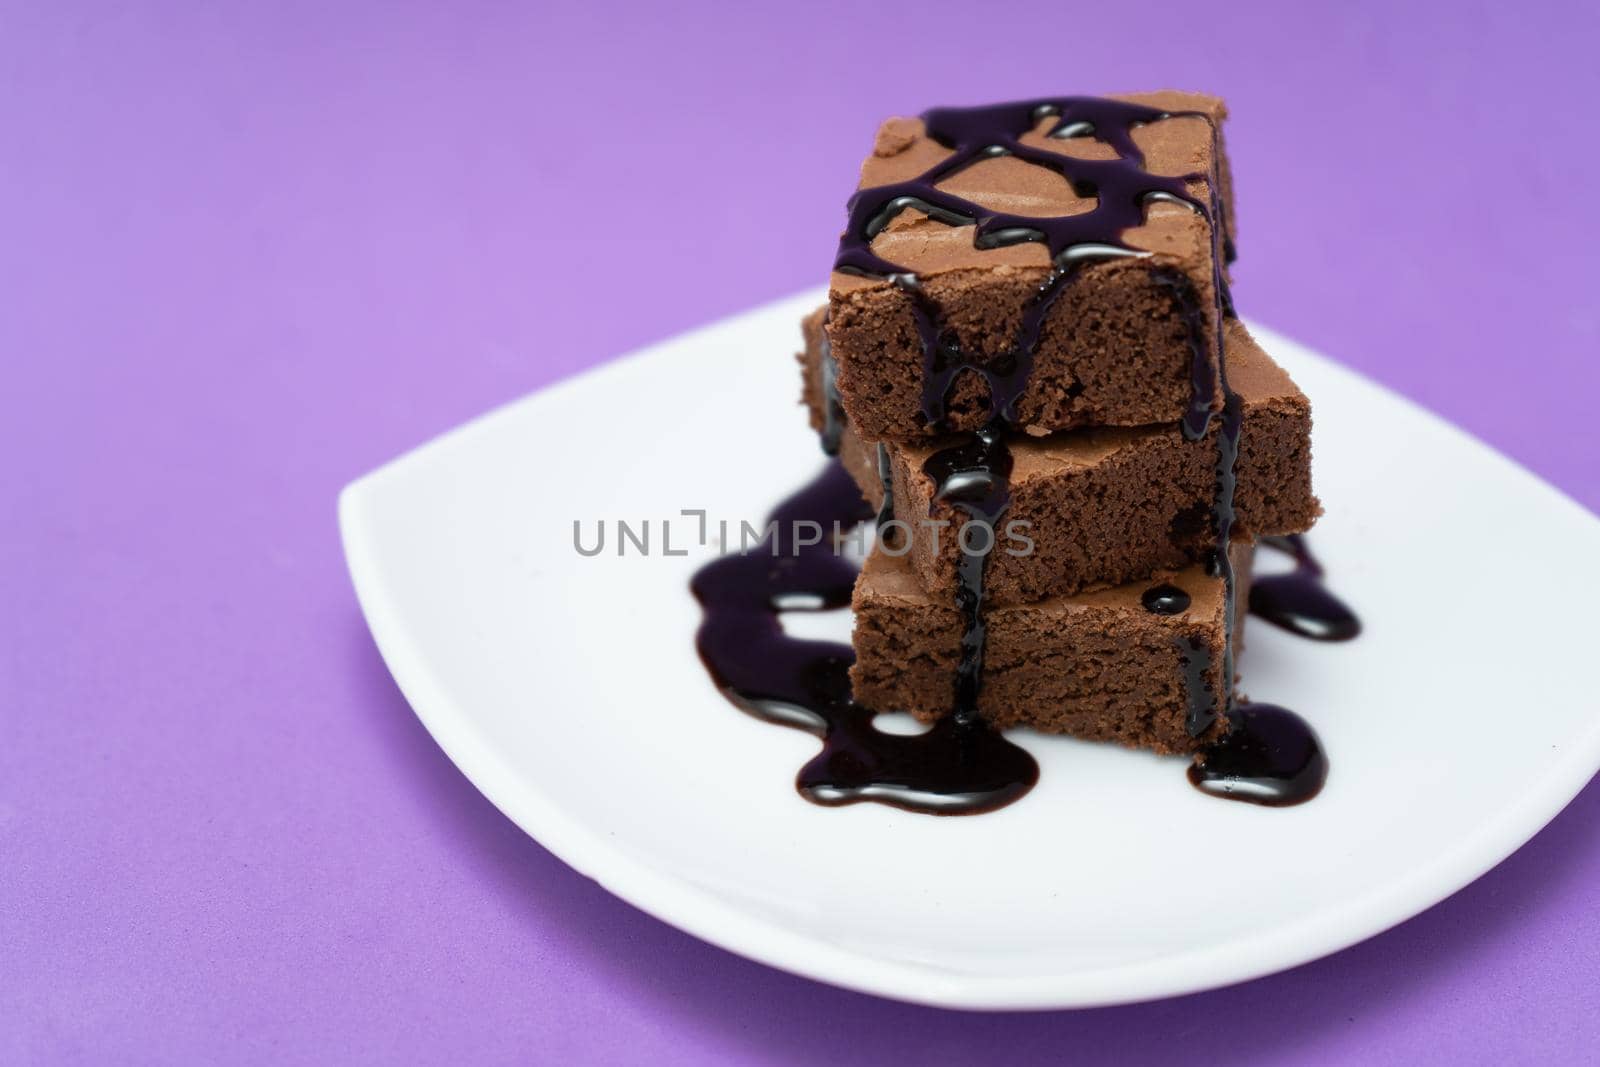 Stack of chocolate brownies on a white plate with purple background. by hdcaputo